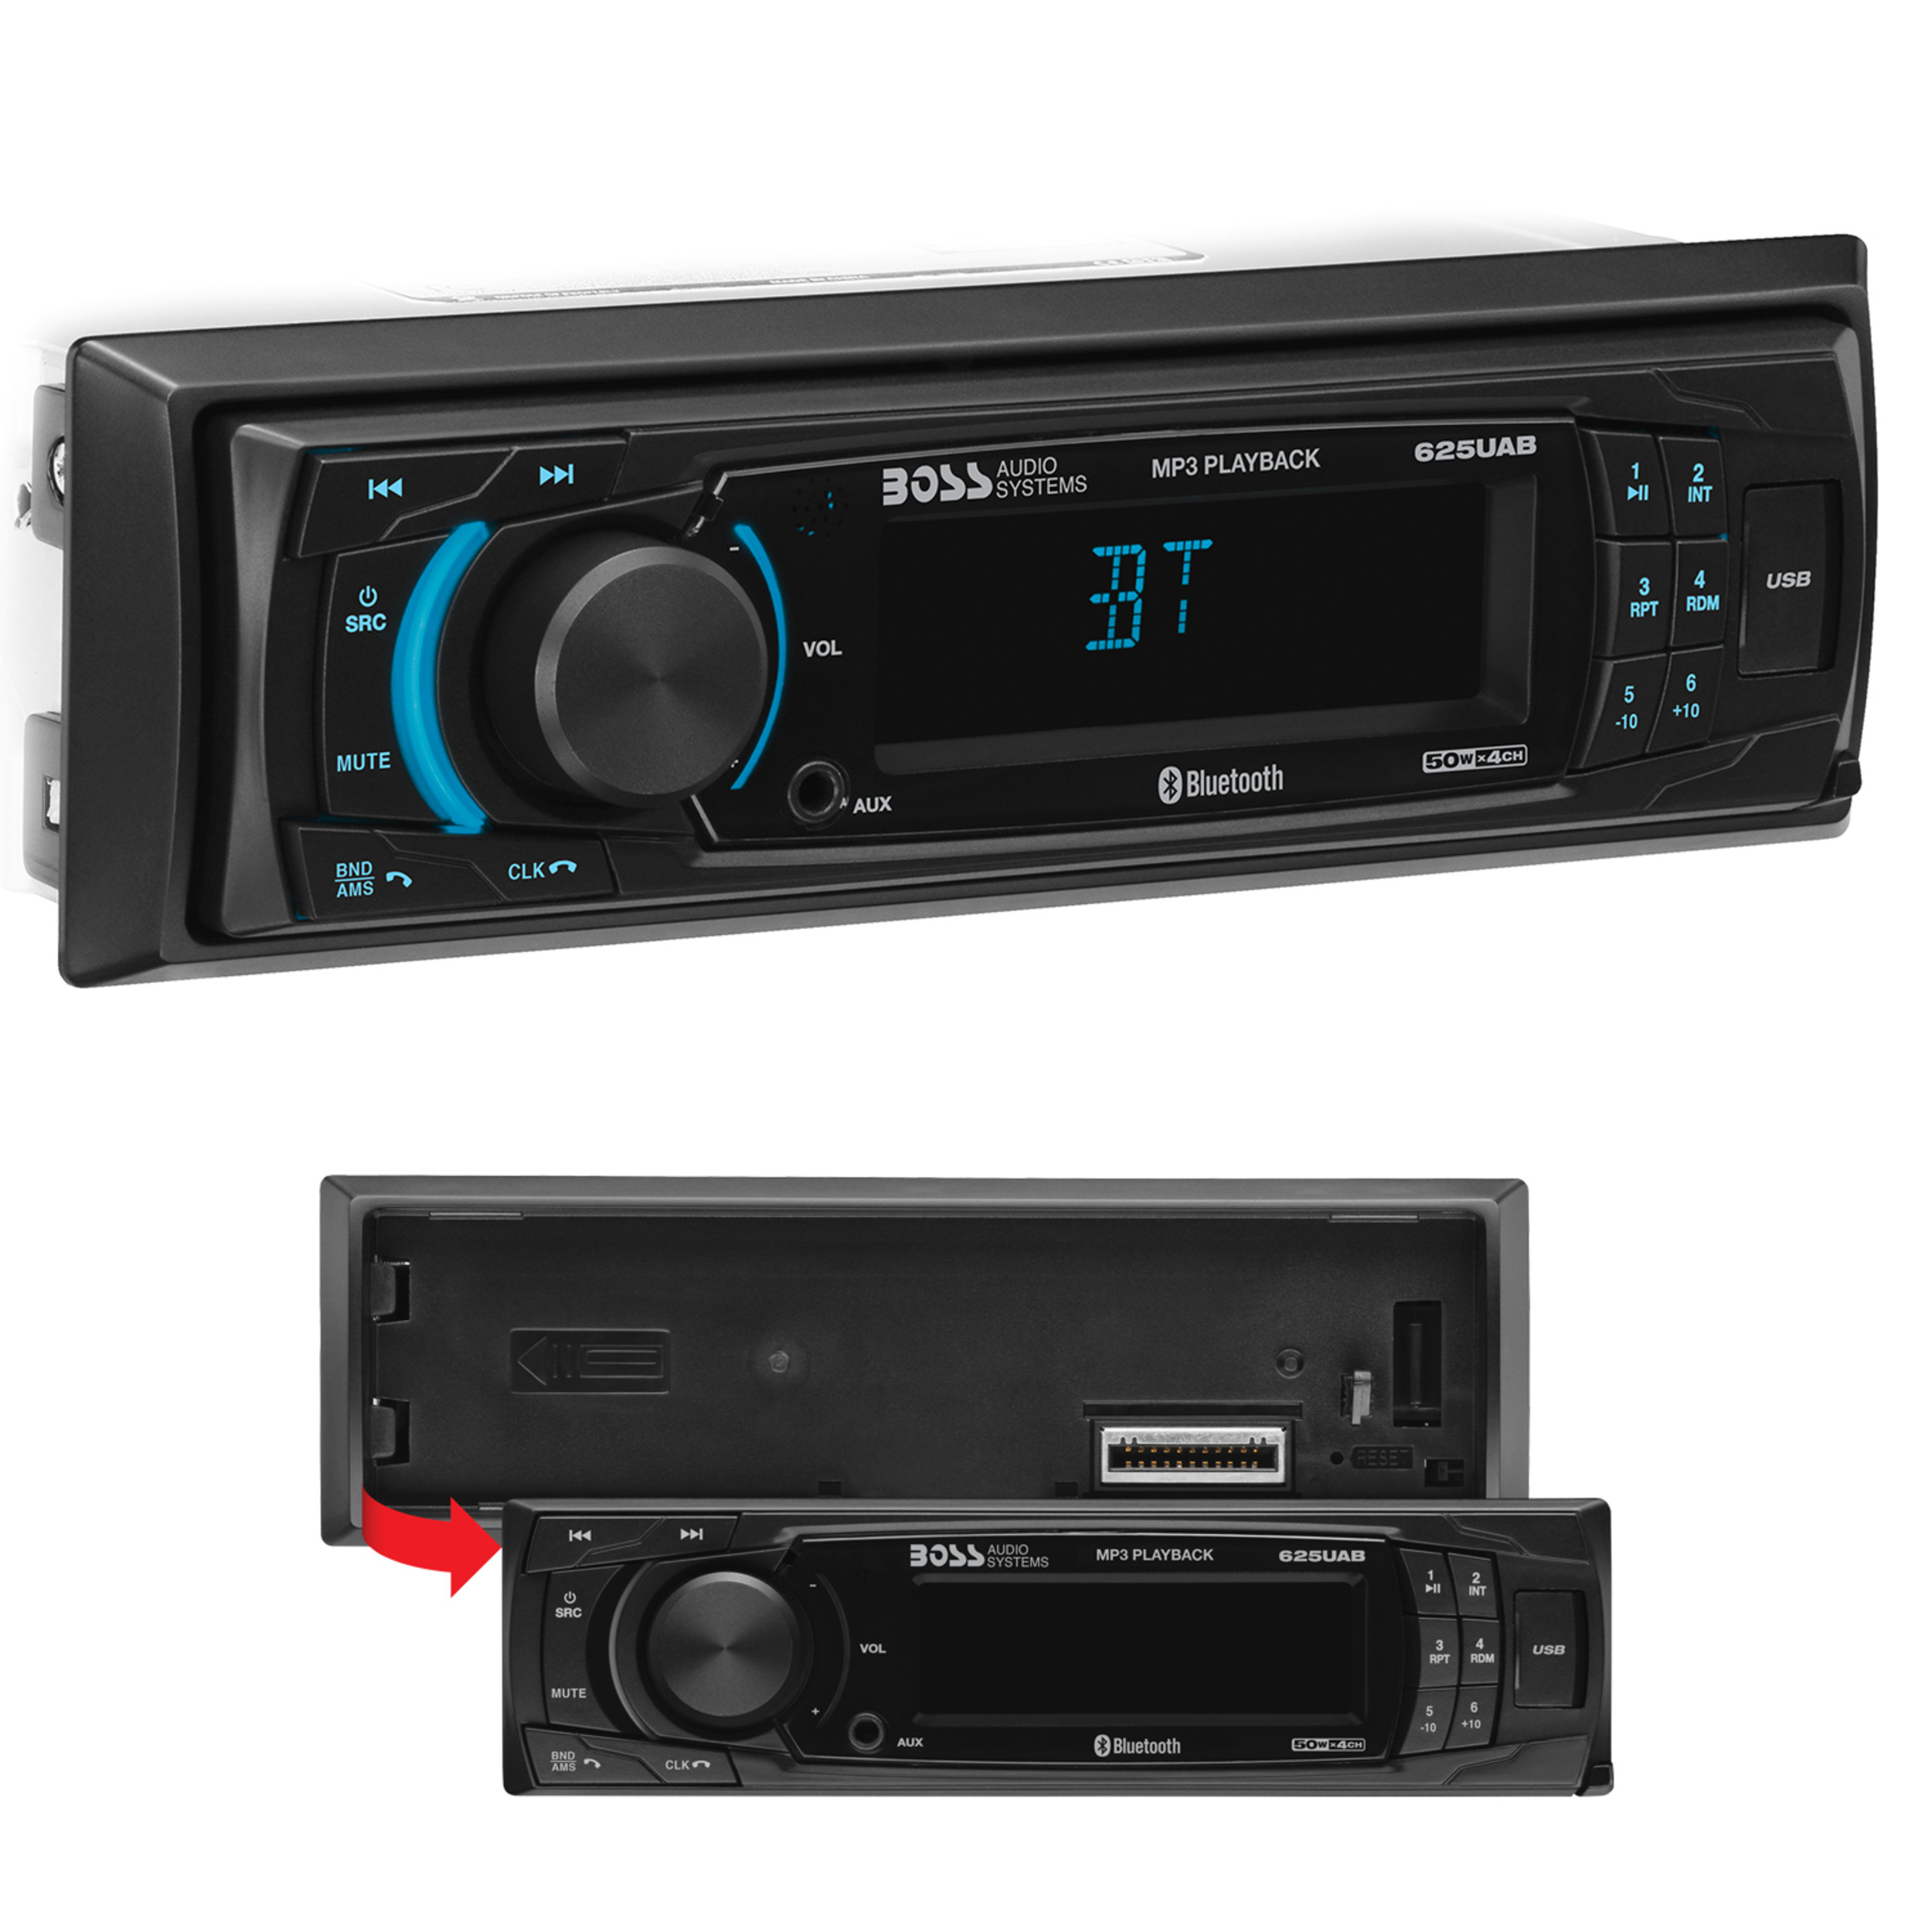 BOSS Audio Systems 625UAB Car Stereo, Bluetooth, No DVD, USB, AUX In AM/FM Radio - image 5 of 14